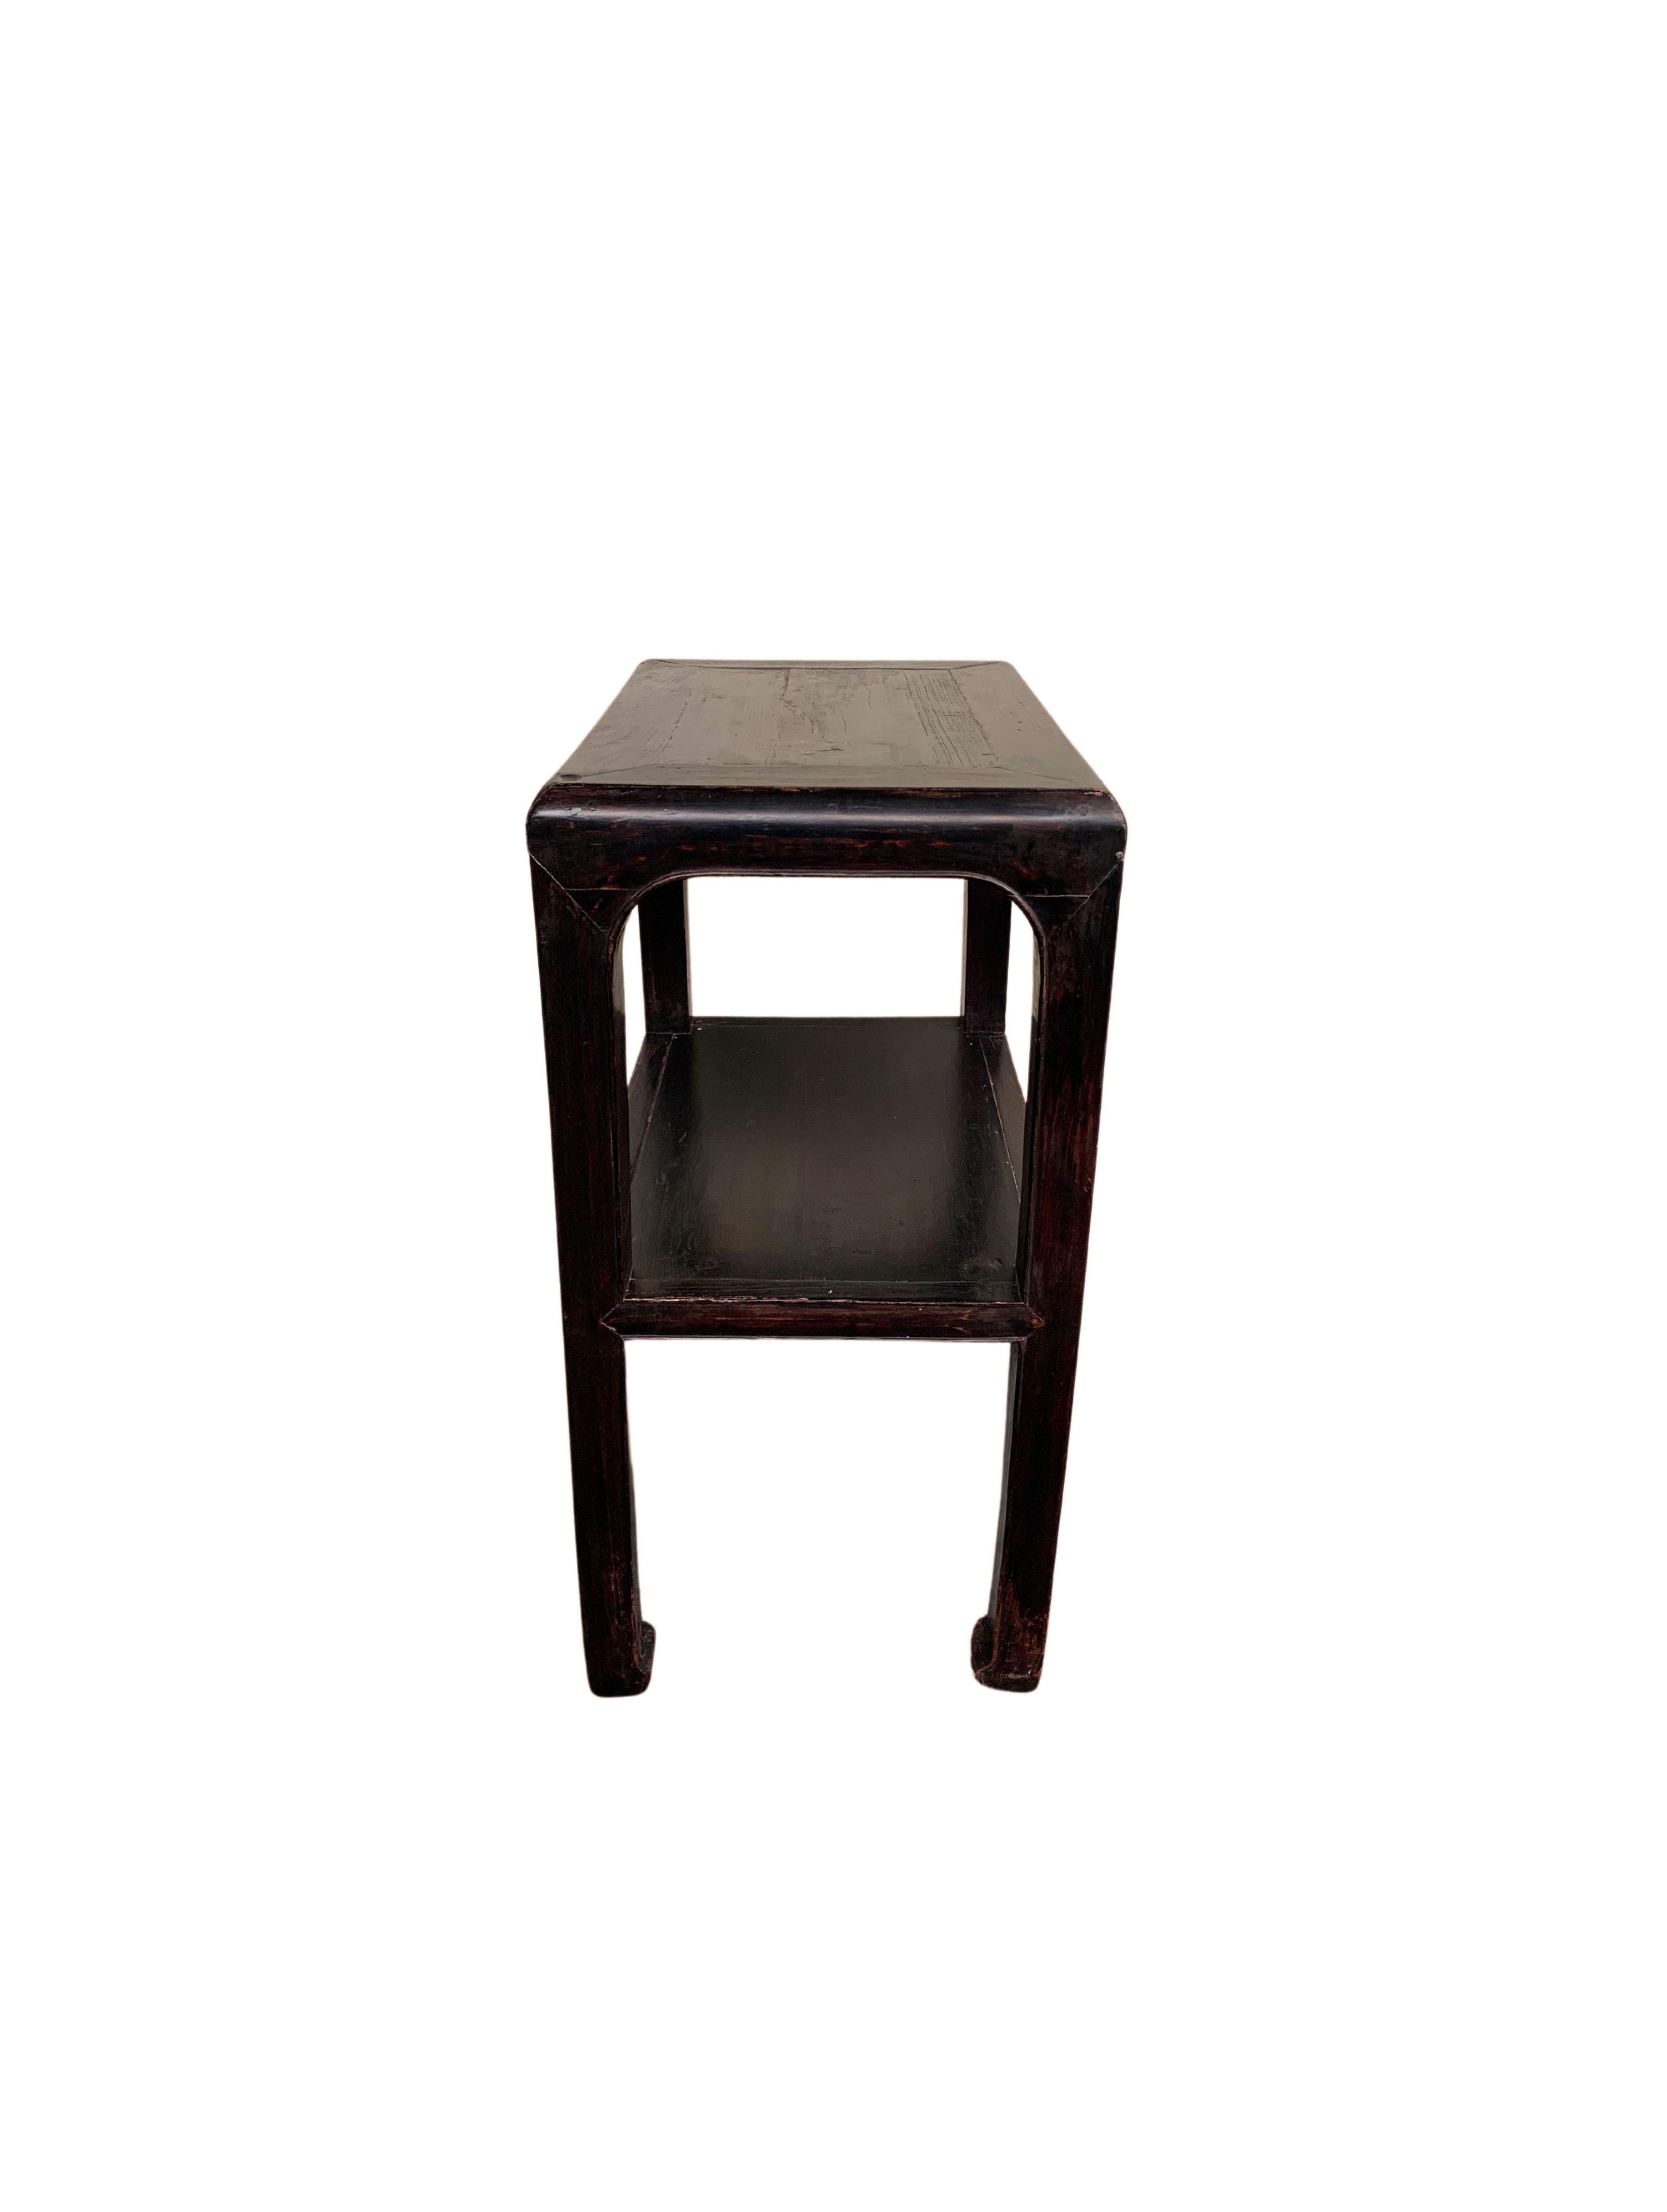 Chinese Lacquered Wooden Table with Curved Legs, c. 1950 For Sale 3